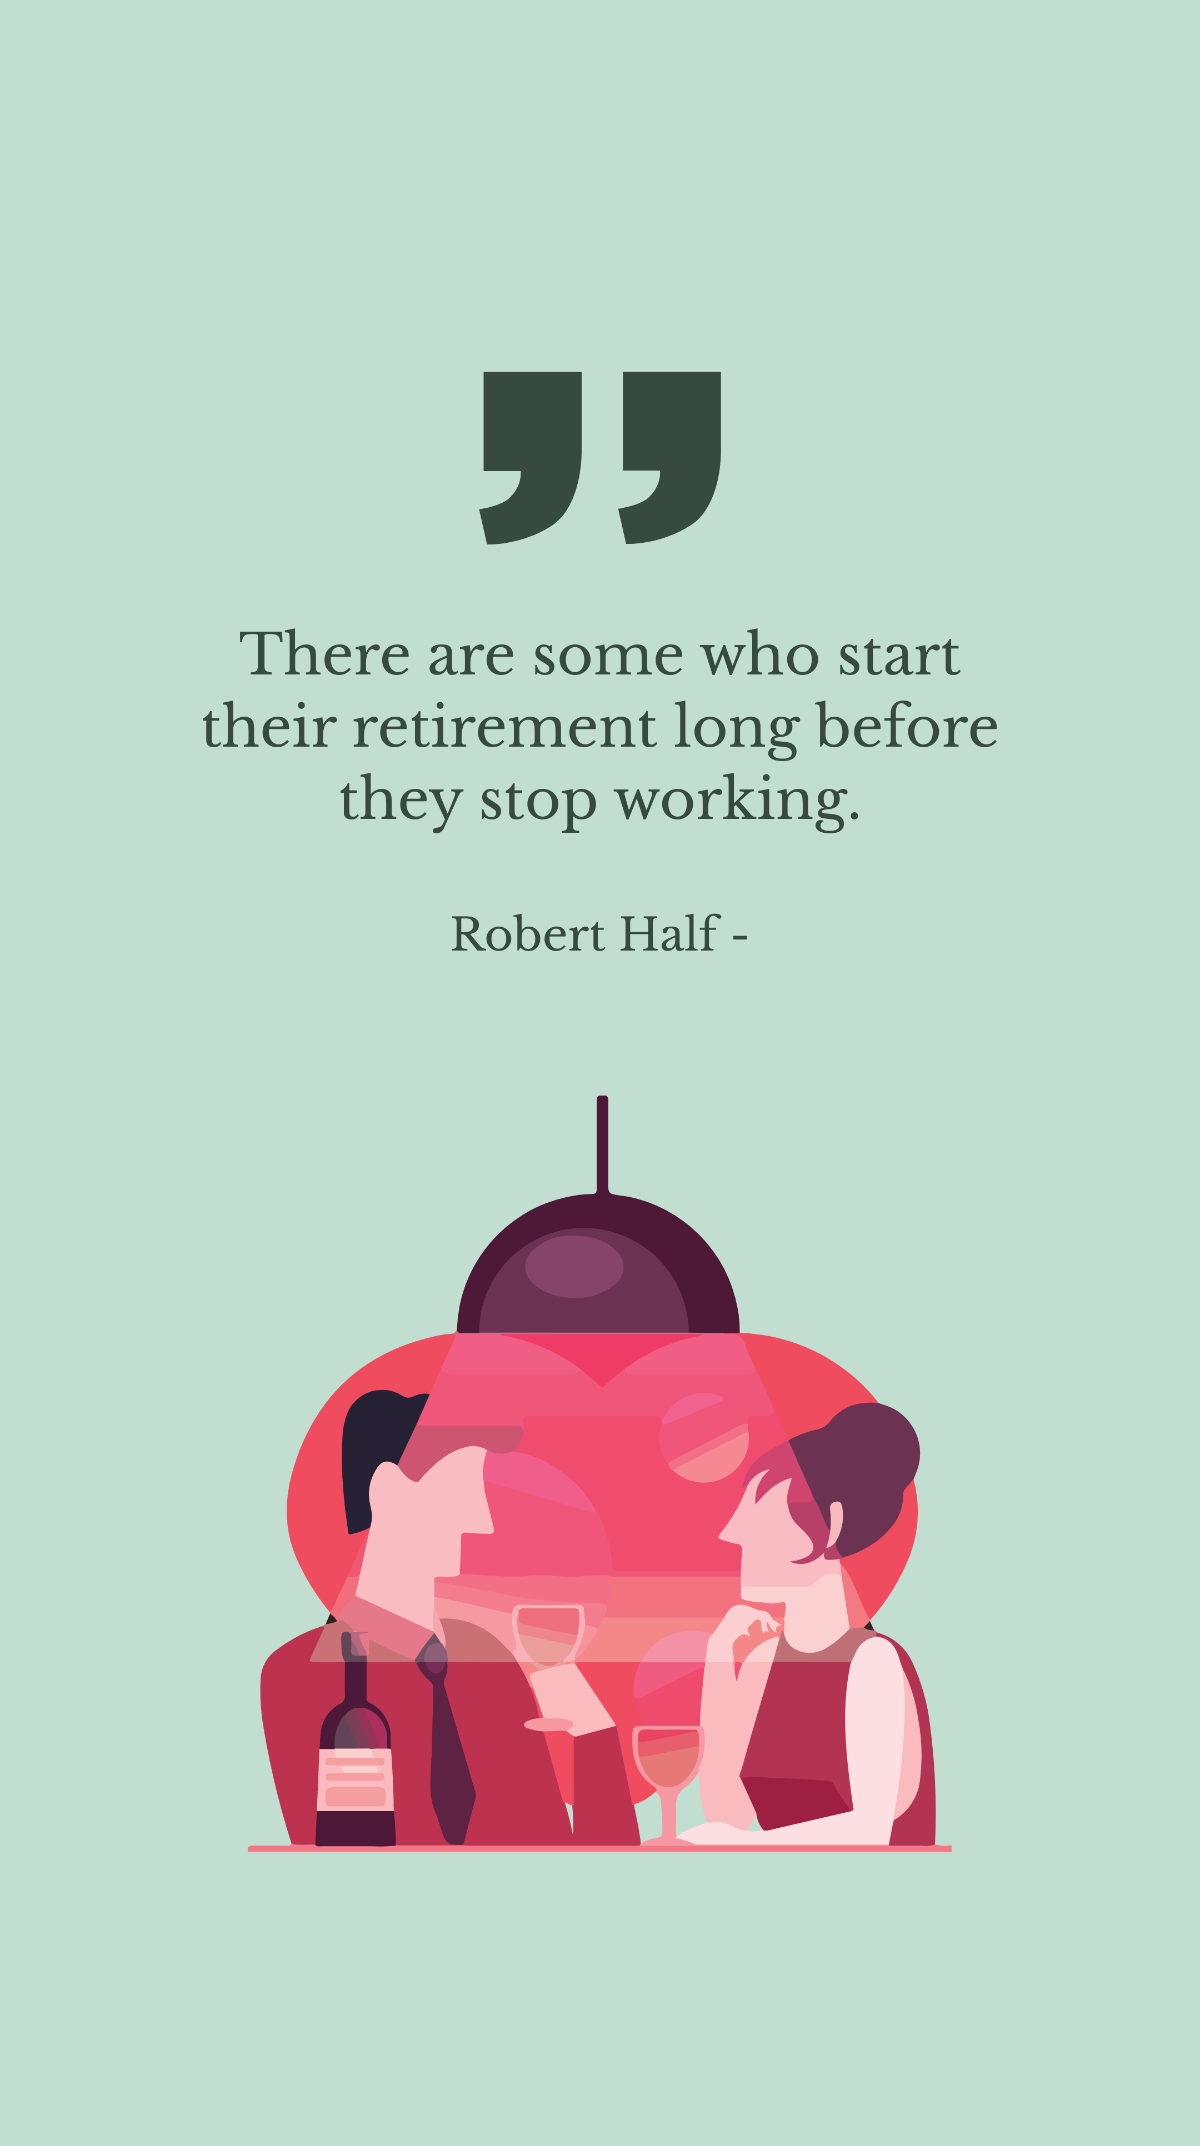 Robert Half - There are some who start their retirement long before they stop working.